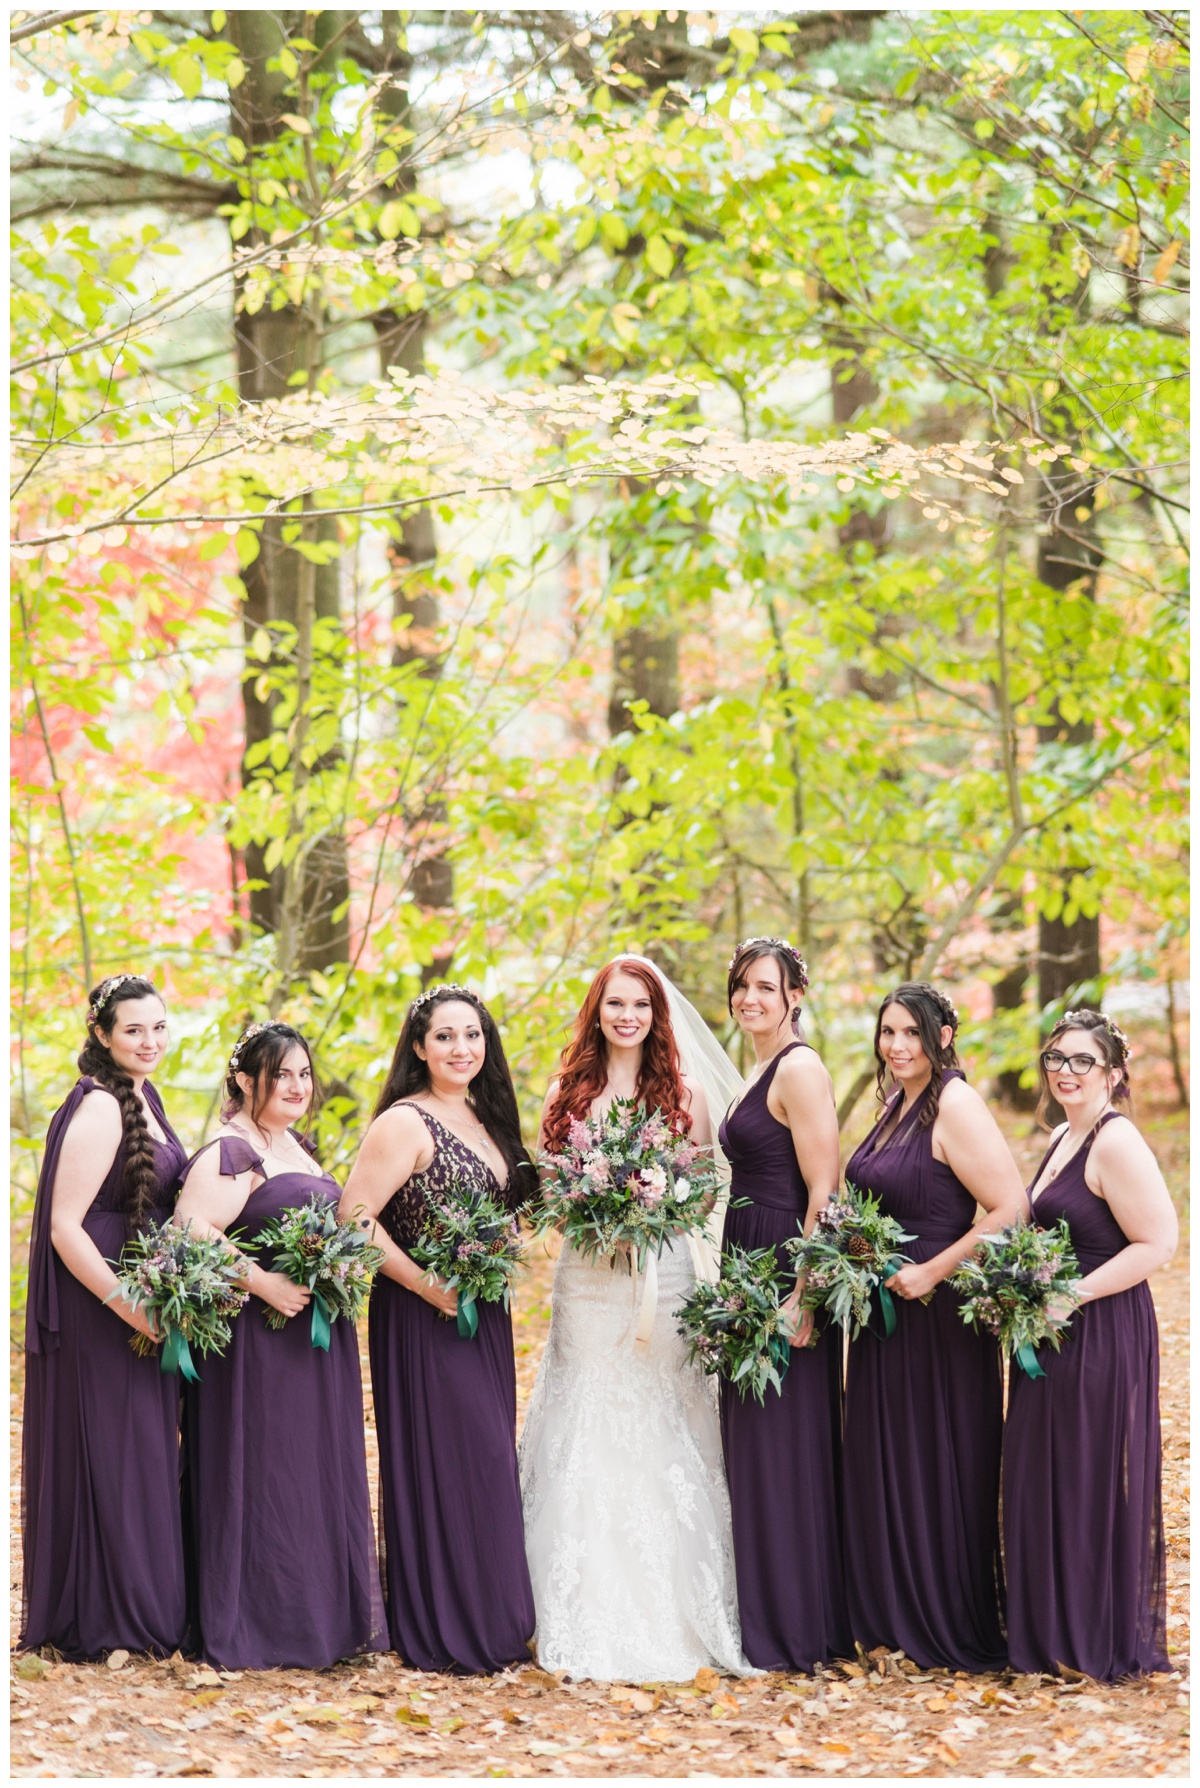 Whimsical Woodland Fall Wedding at mountain memories at thorpewood in thurmont maryland in october by sarah & dave photography richmond wedding photographer deep dark purple bridesmaid dresses holding bouquet wedding party photos with bride formal portrait ideas bridal party formal portrait inspiration 